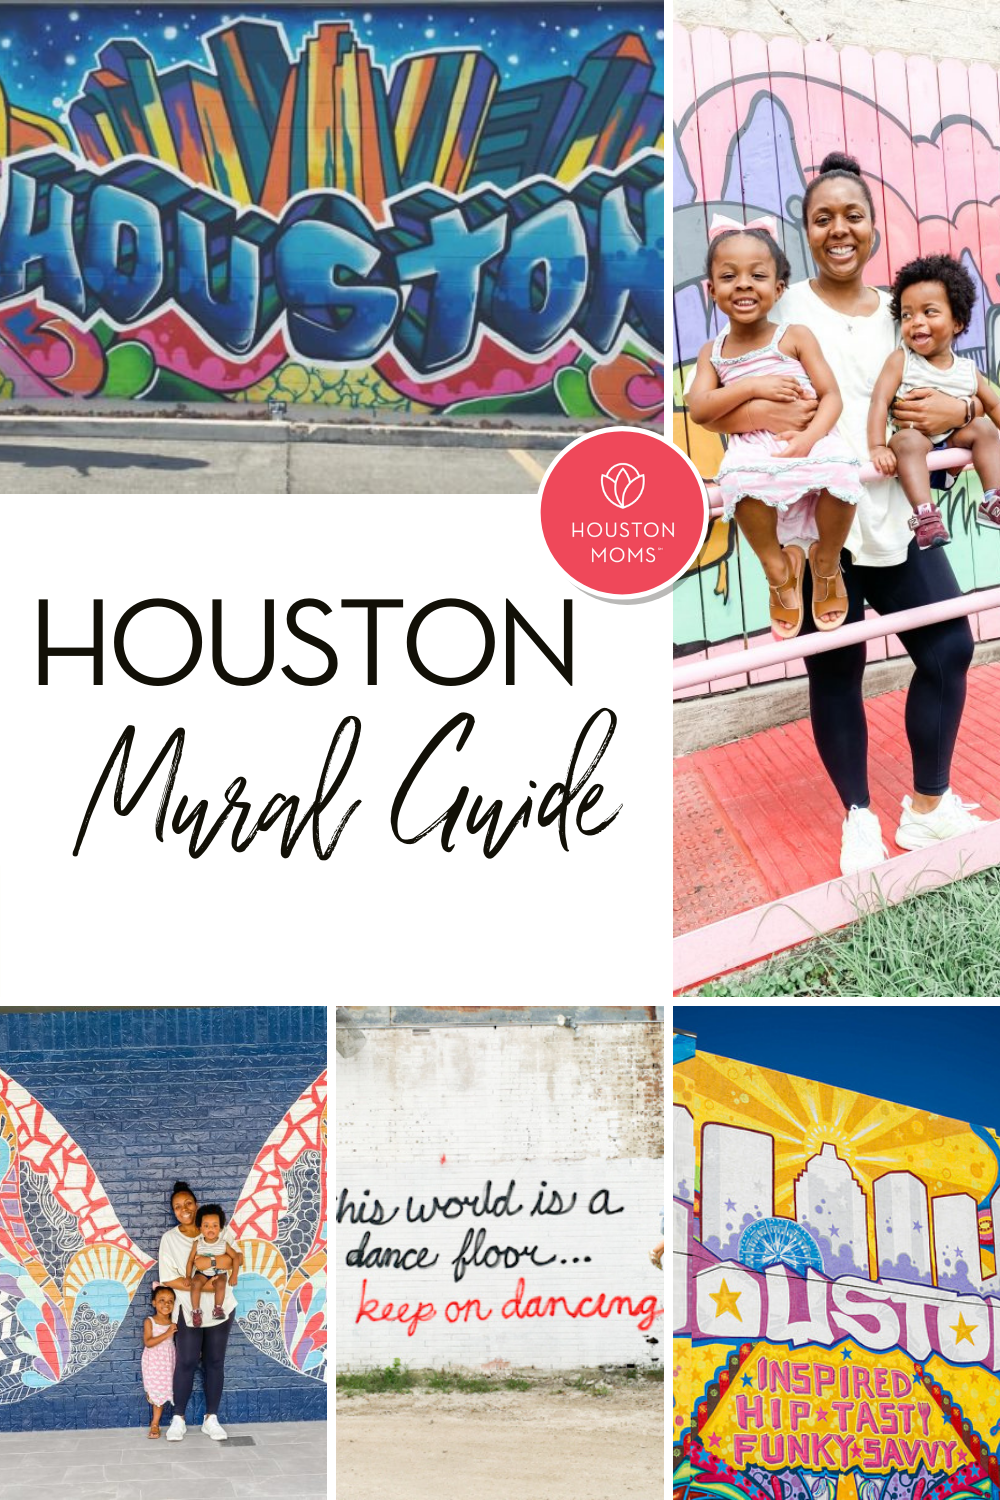 Houston Mural Guide. Logo: Houston Moms. Five photographs of families posing in front of murals. 